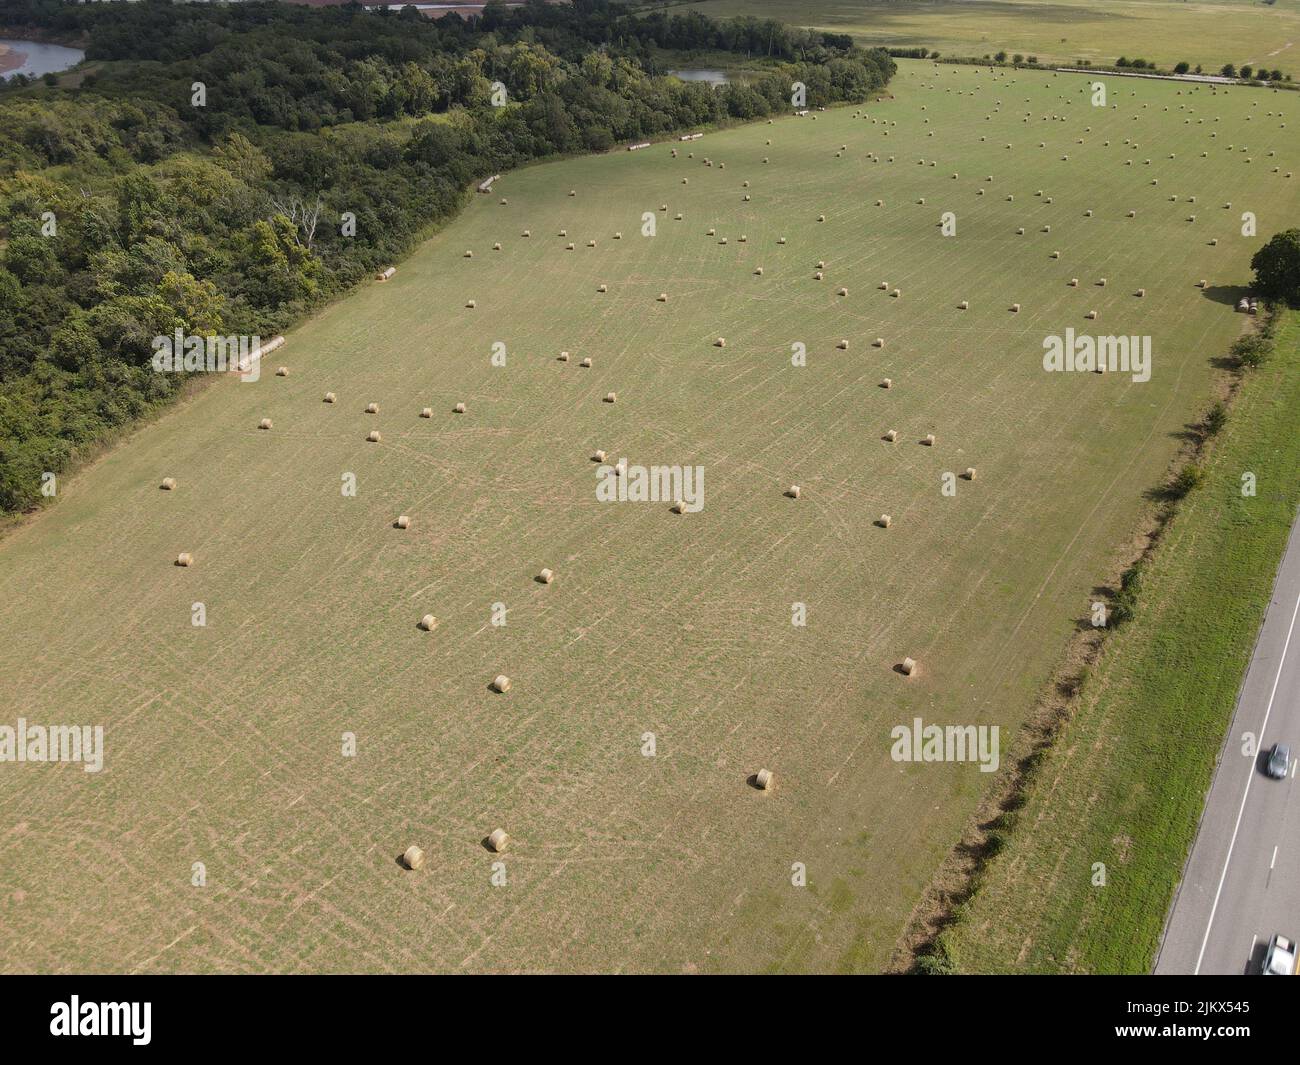 A bird's eye view of hay bales on a green field near cars driving on an asphalt road Stock Photo